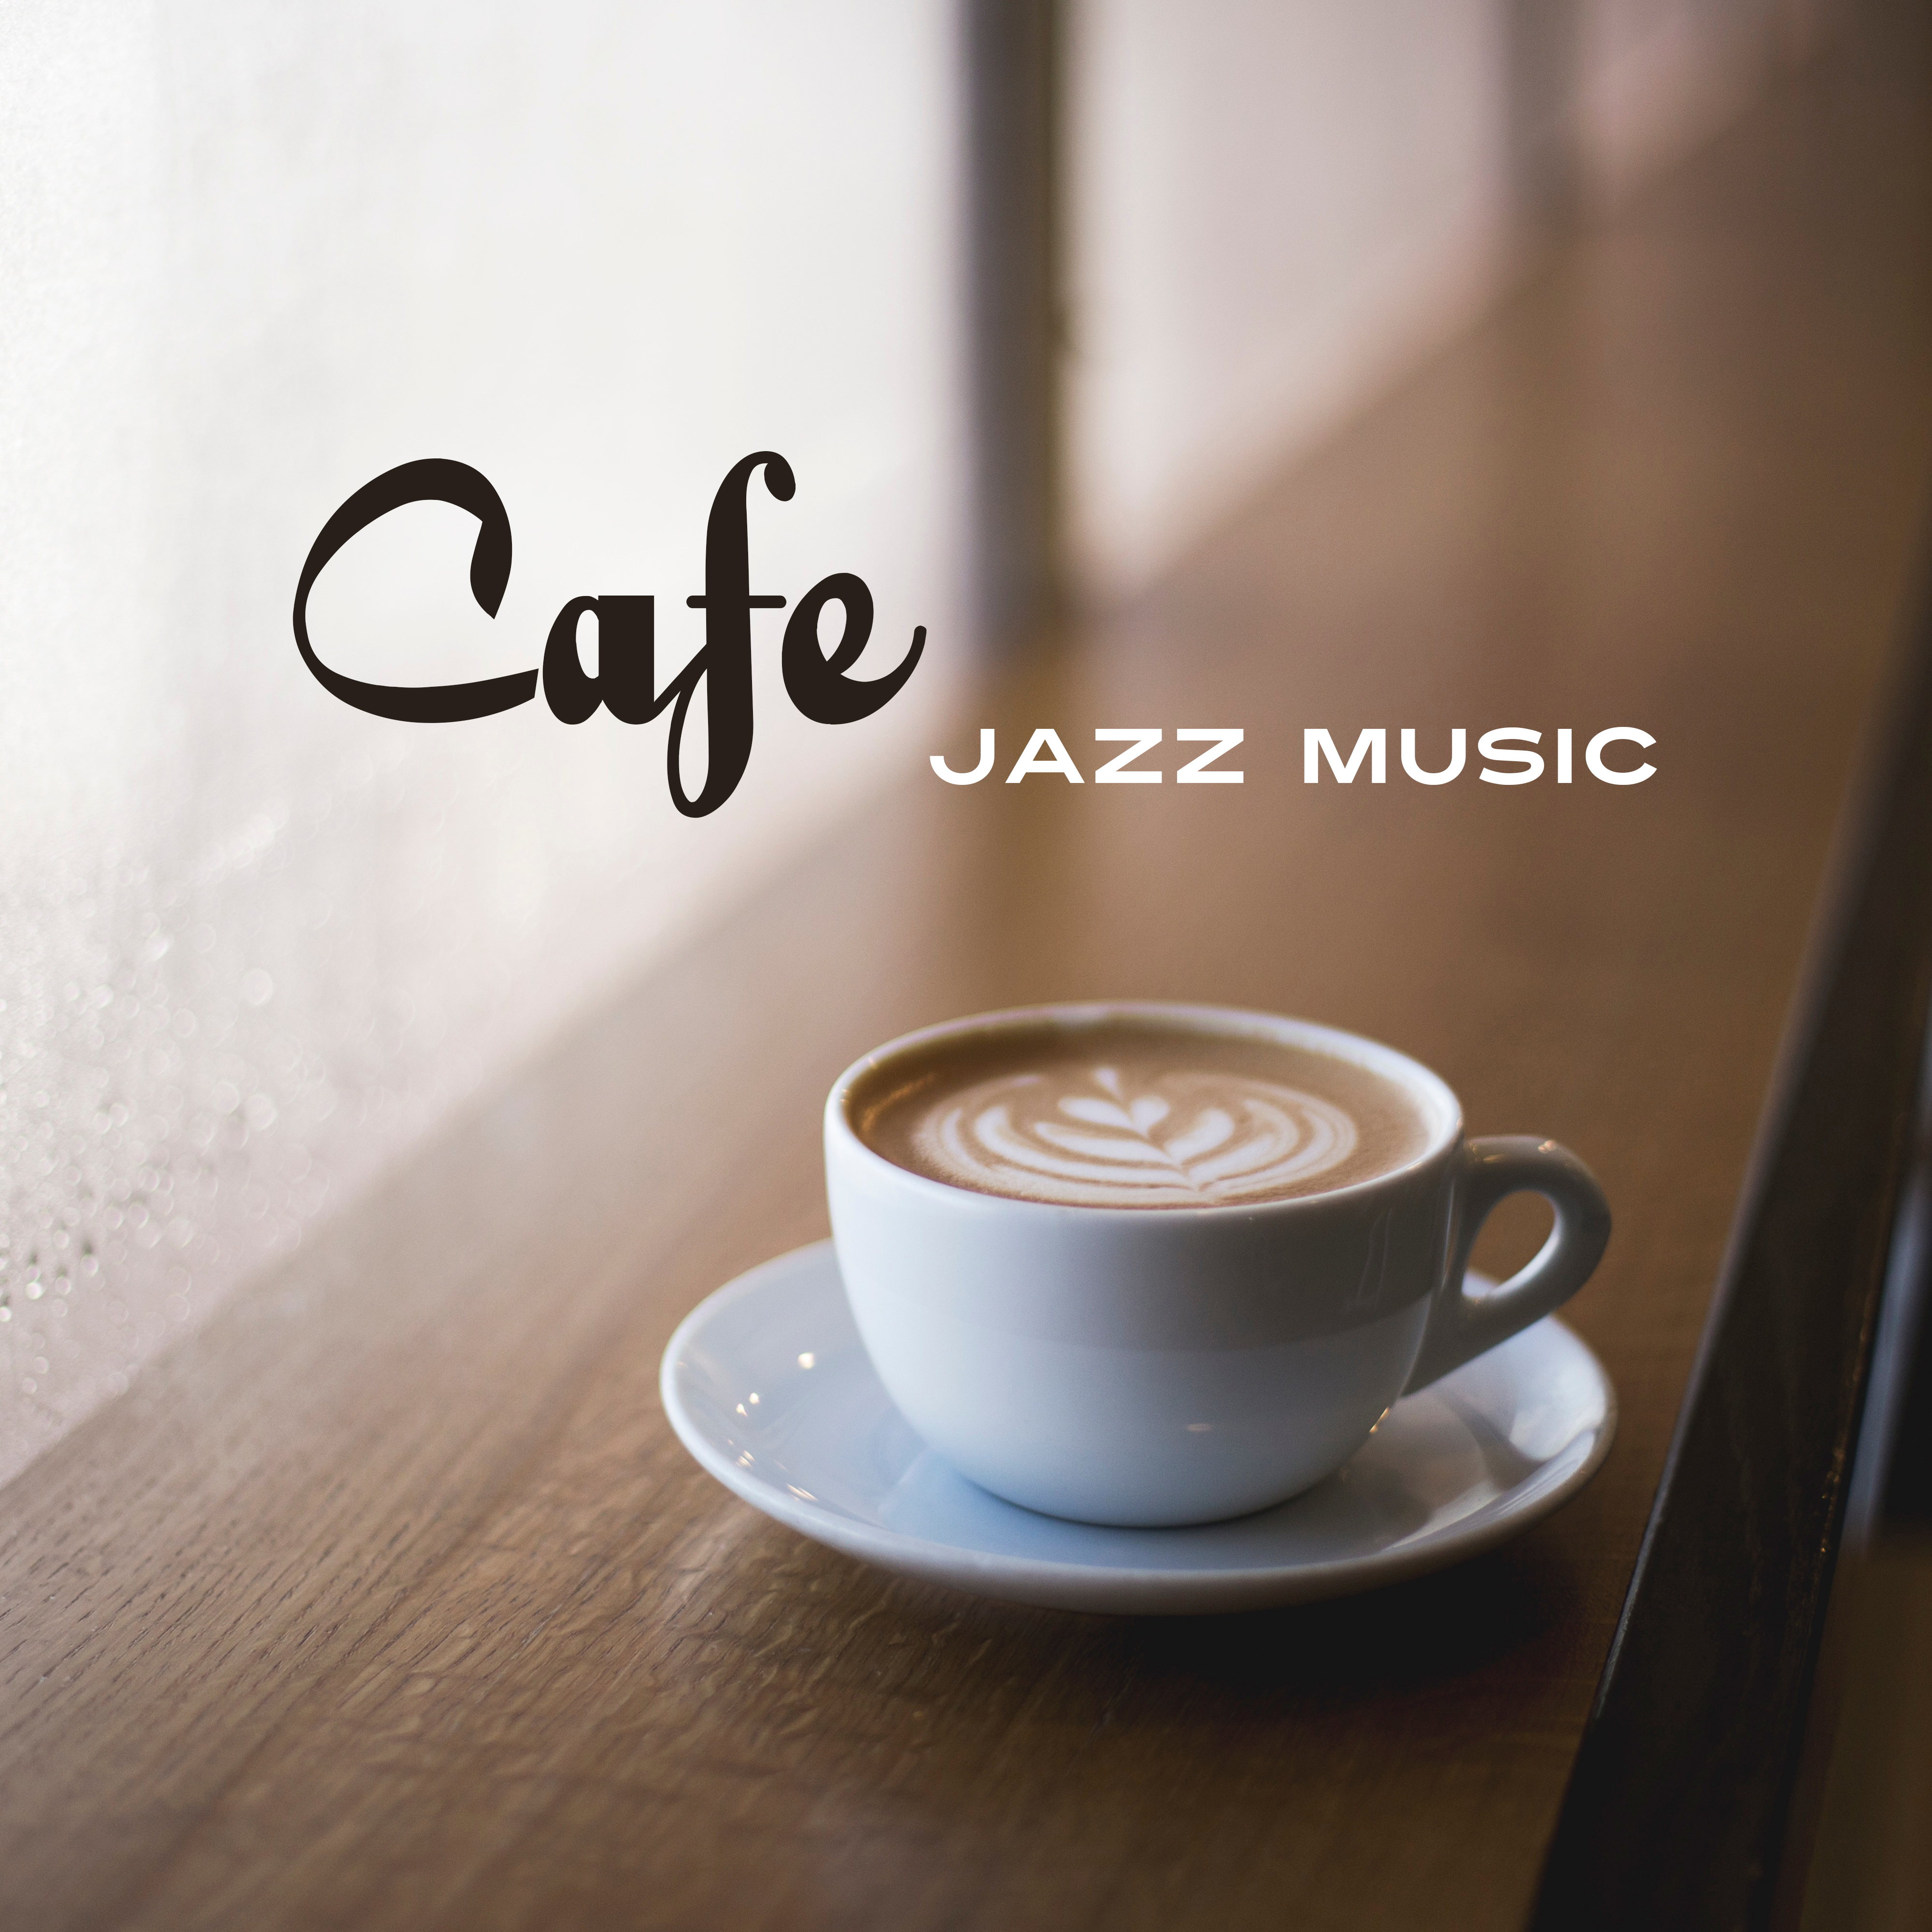 Cafe Jazz Music  Calming Music for Cafe Restaurant, Smooth Jazz, Background Instrumental Songs, Soothing Melodies